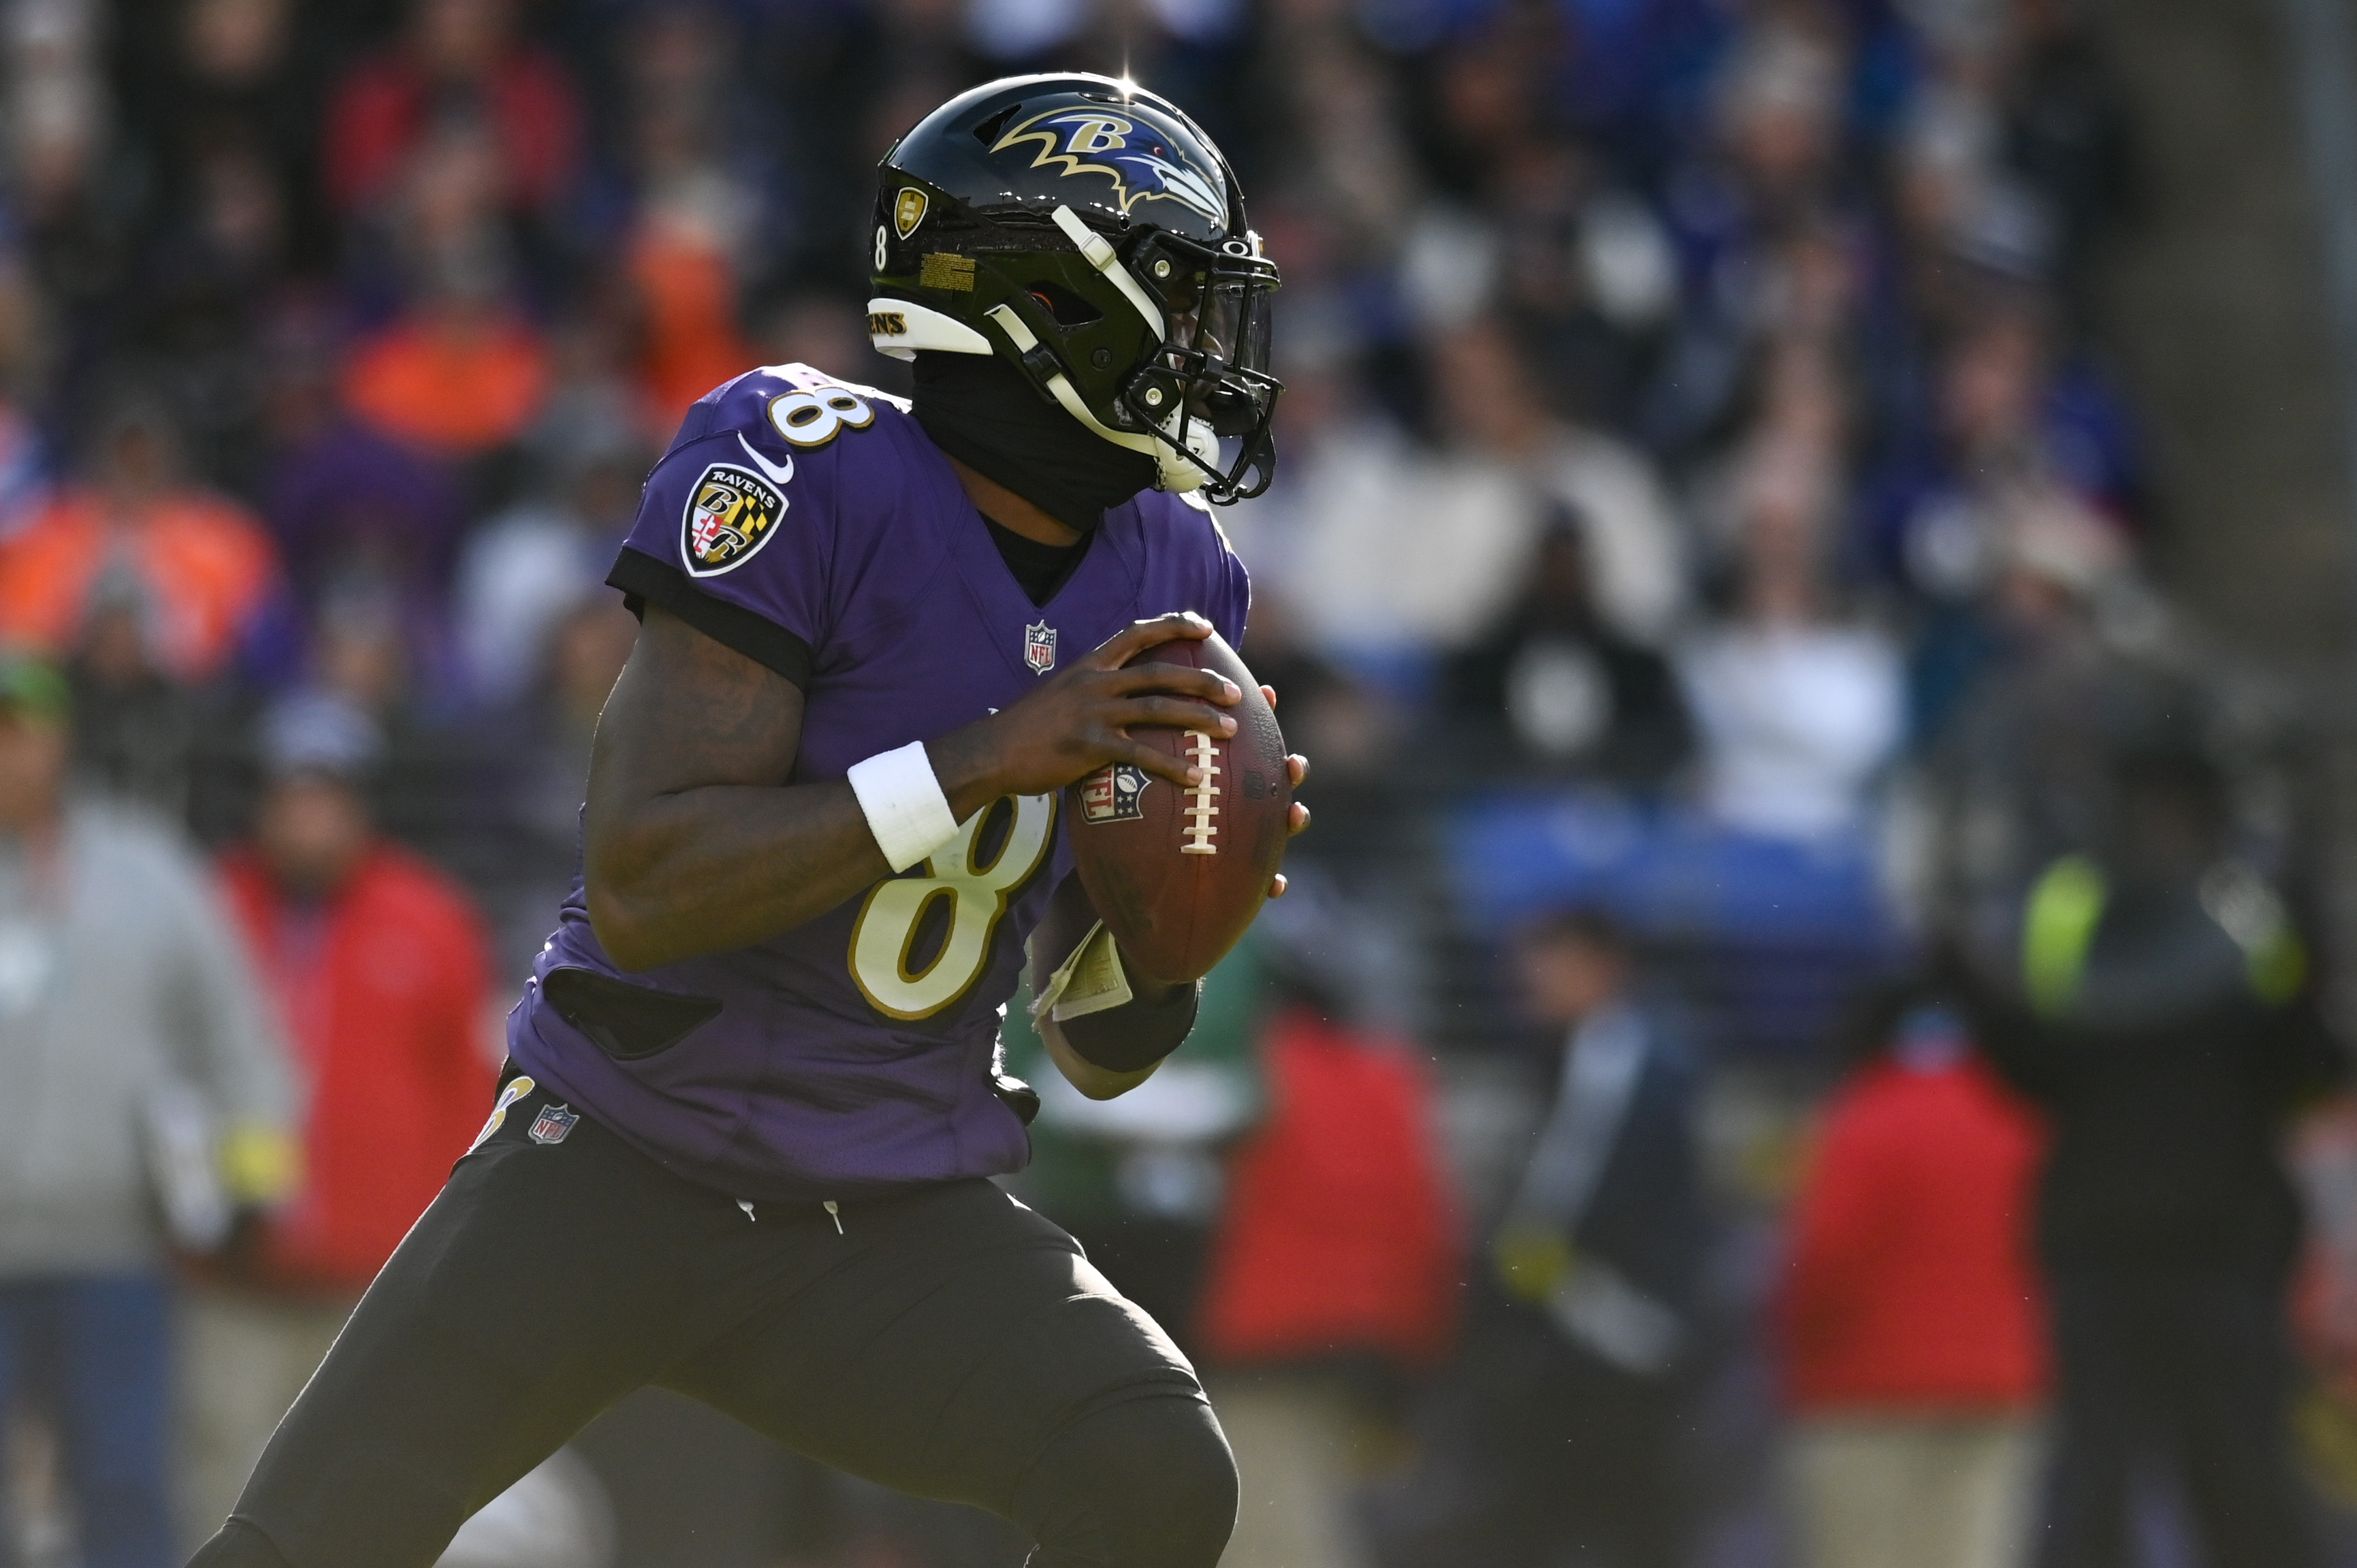 Might Kwesi Make an Offer for Lamar Jackson? - Daily Norseman